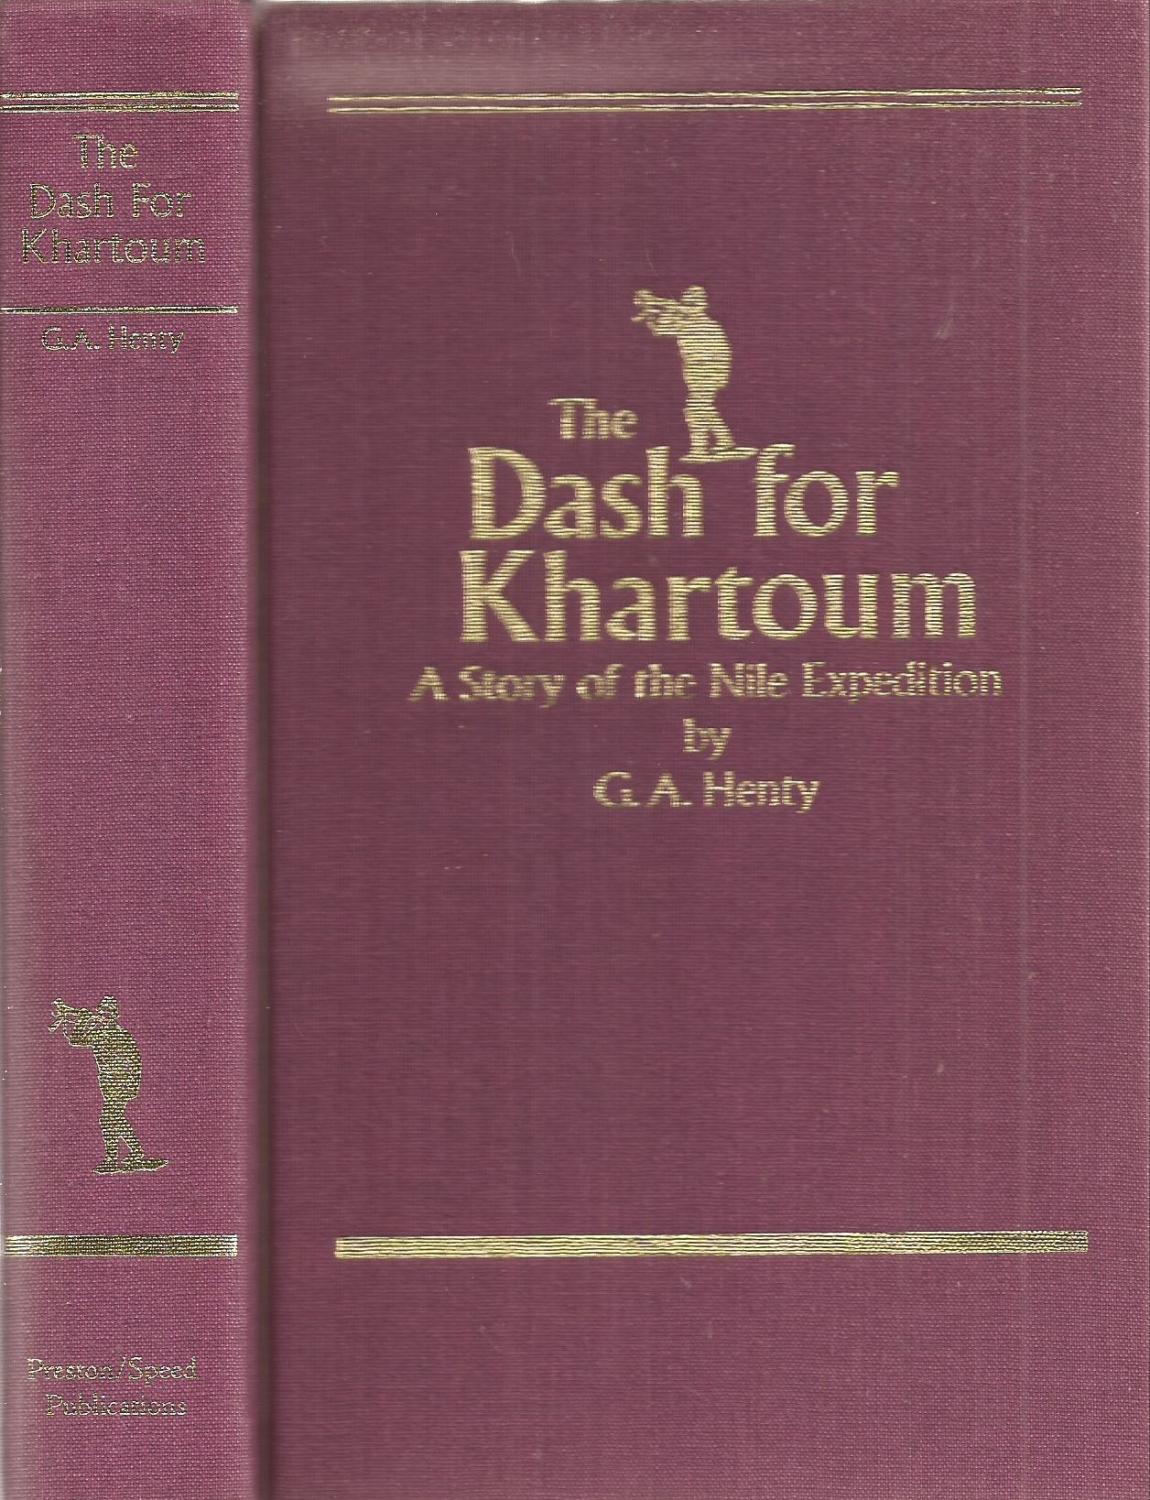 The Dash for Khartoum: A Story of the Nile Expedition (also Camp Life in Abyssinia) - Henty, G. A. w/illus. by Joseph Nash & John Schonberg